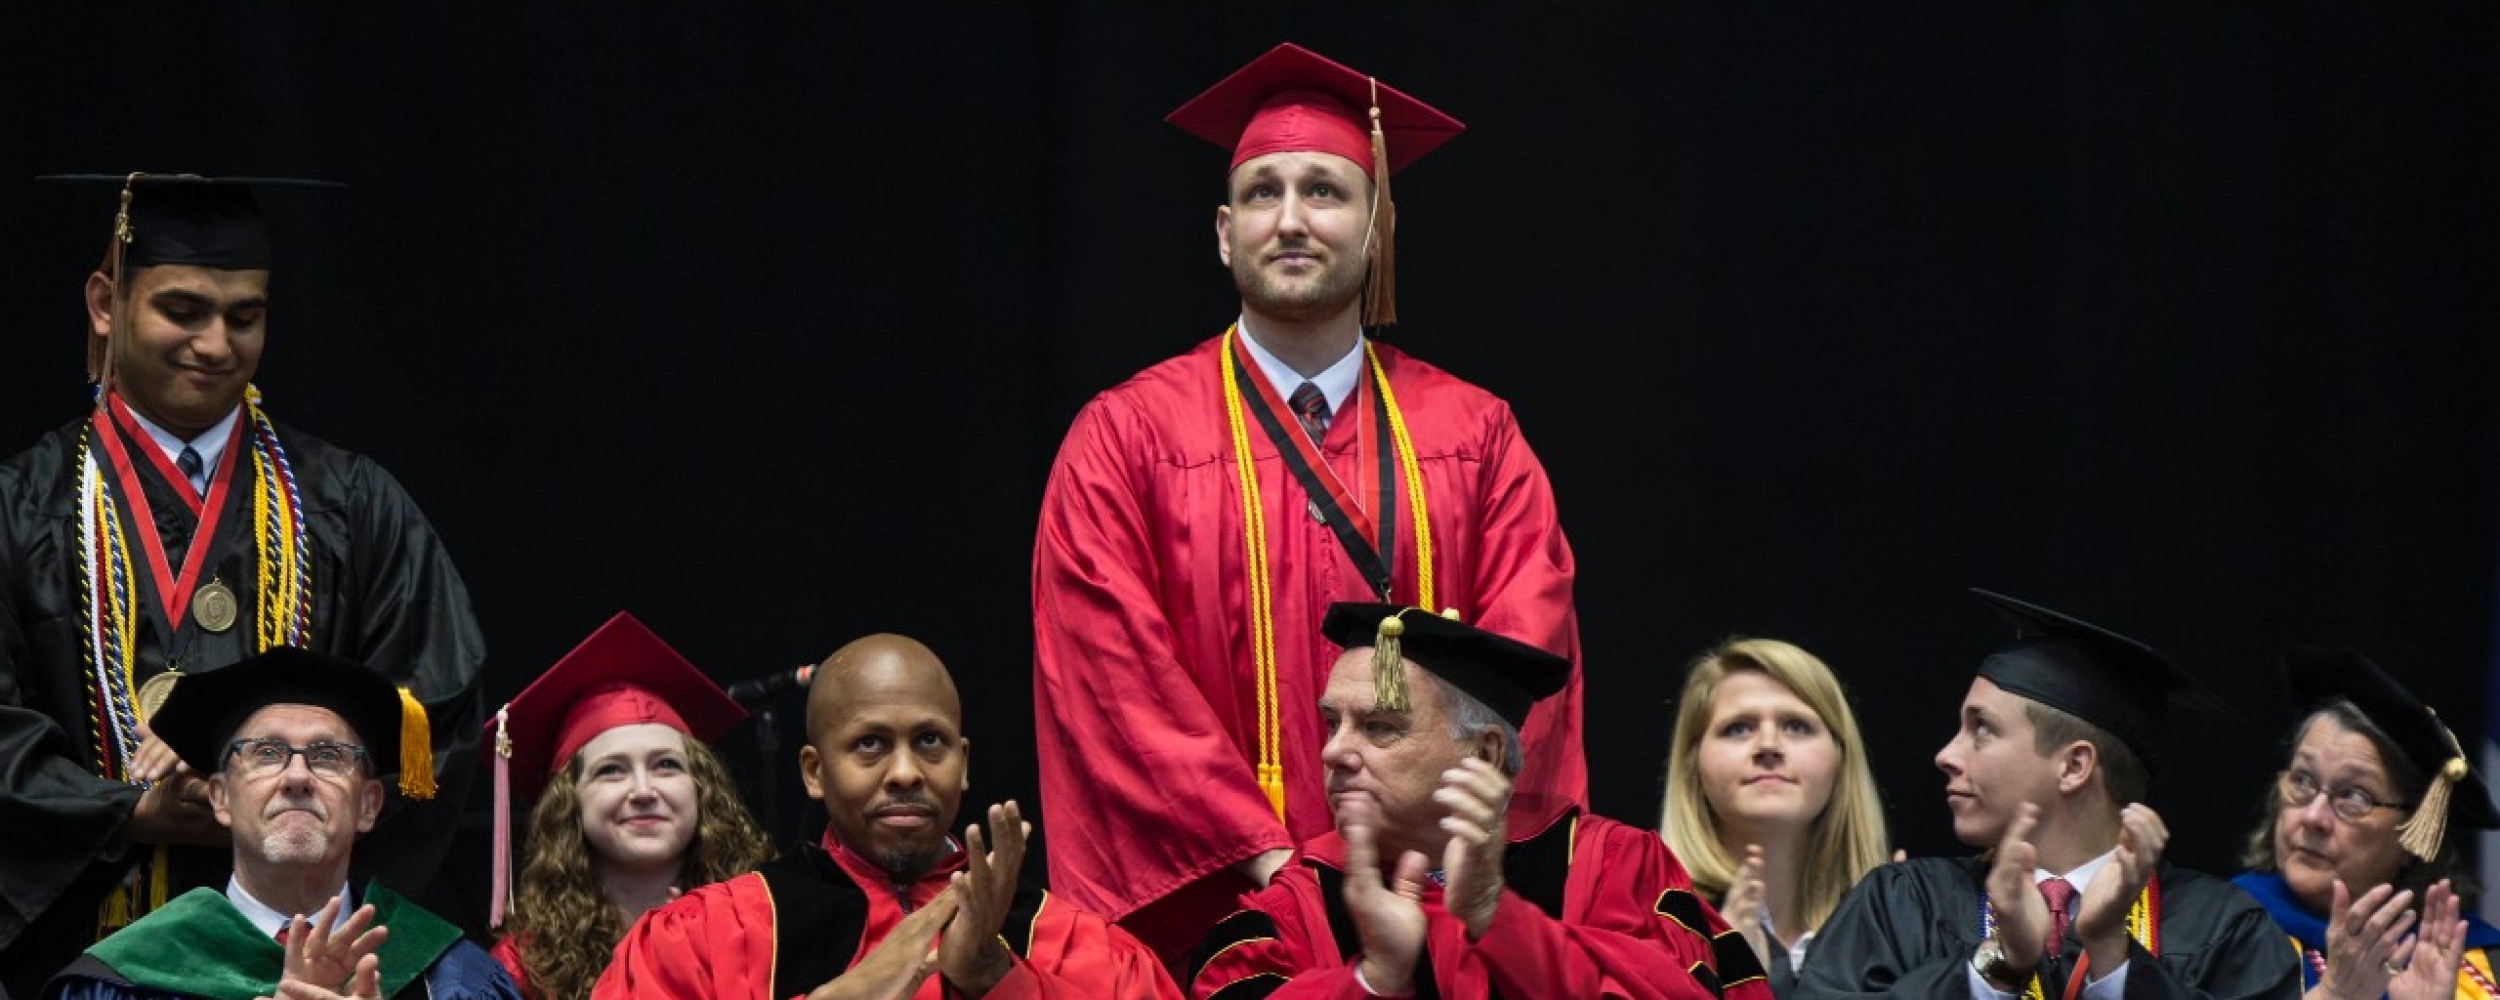 Cory Murphy stands to be recognized during commencement